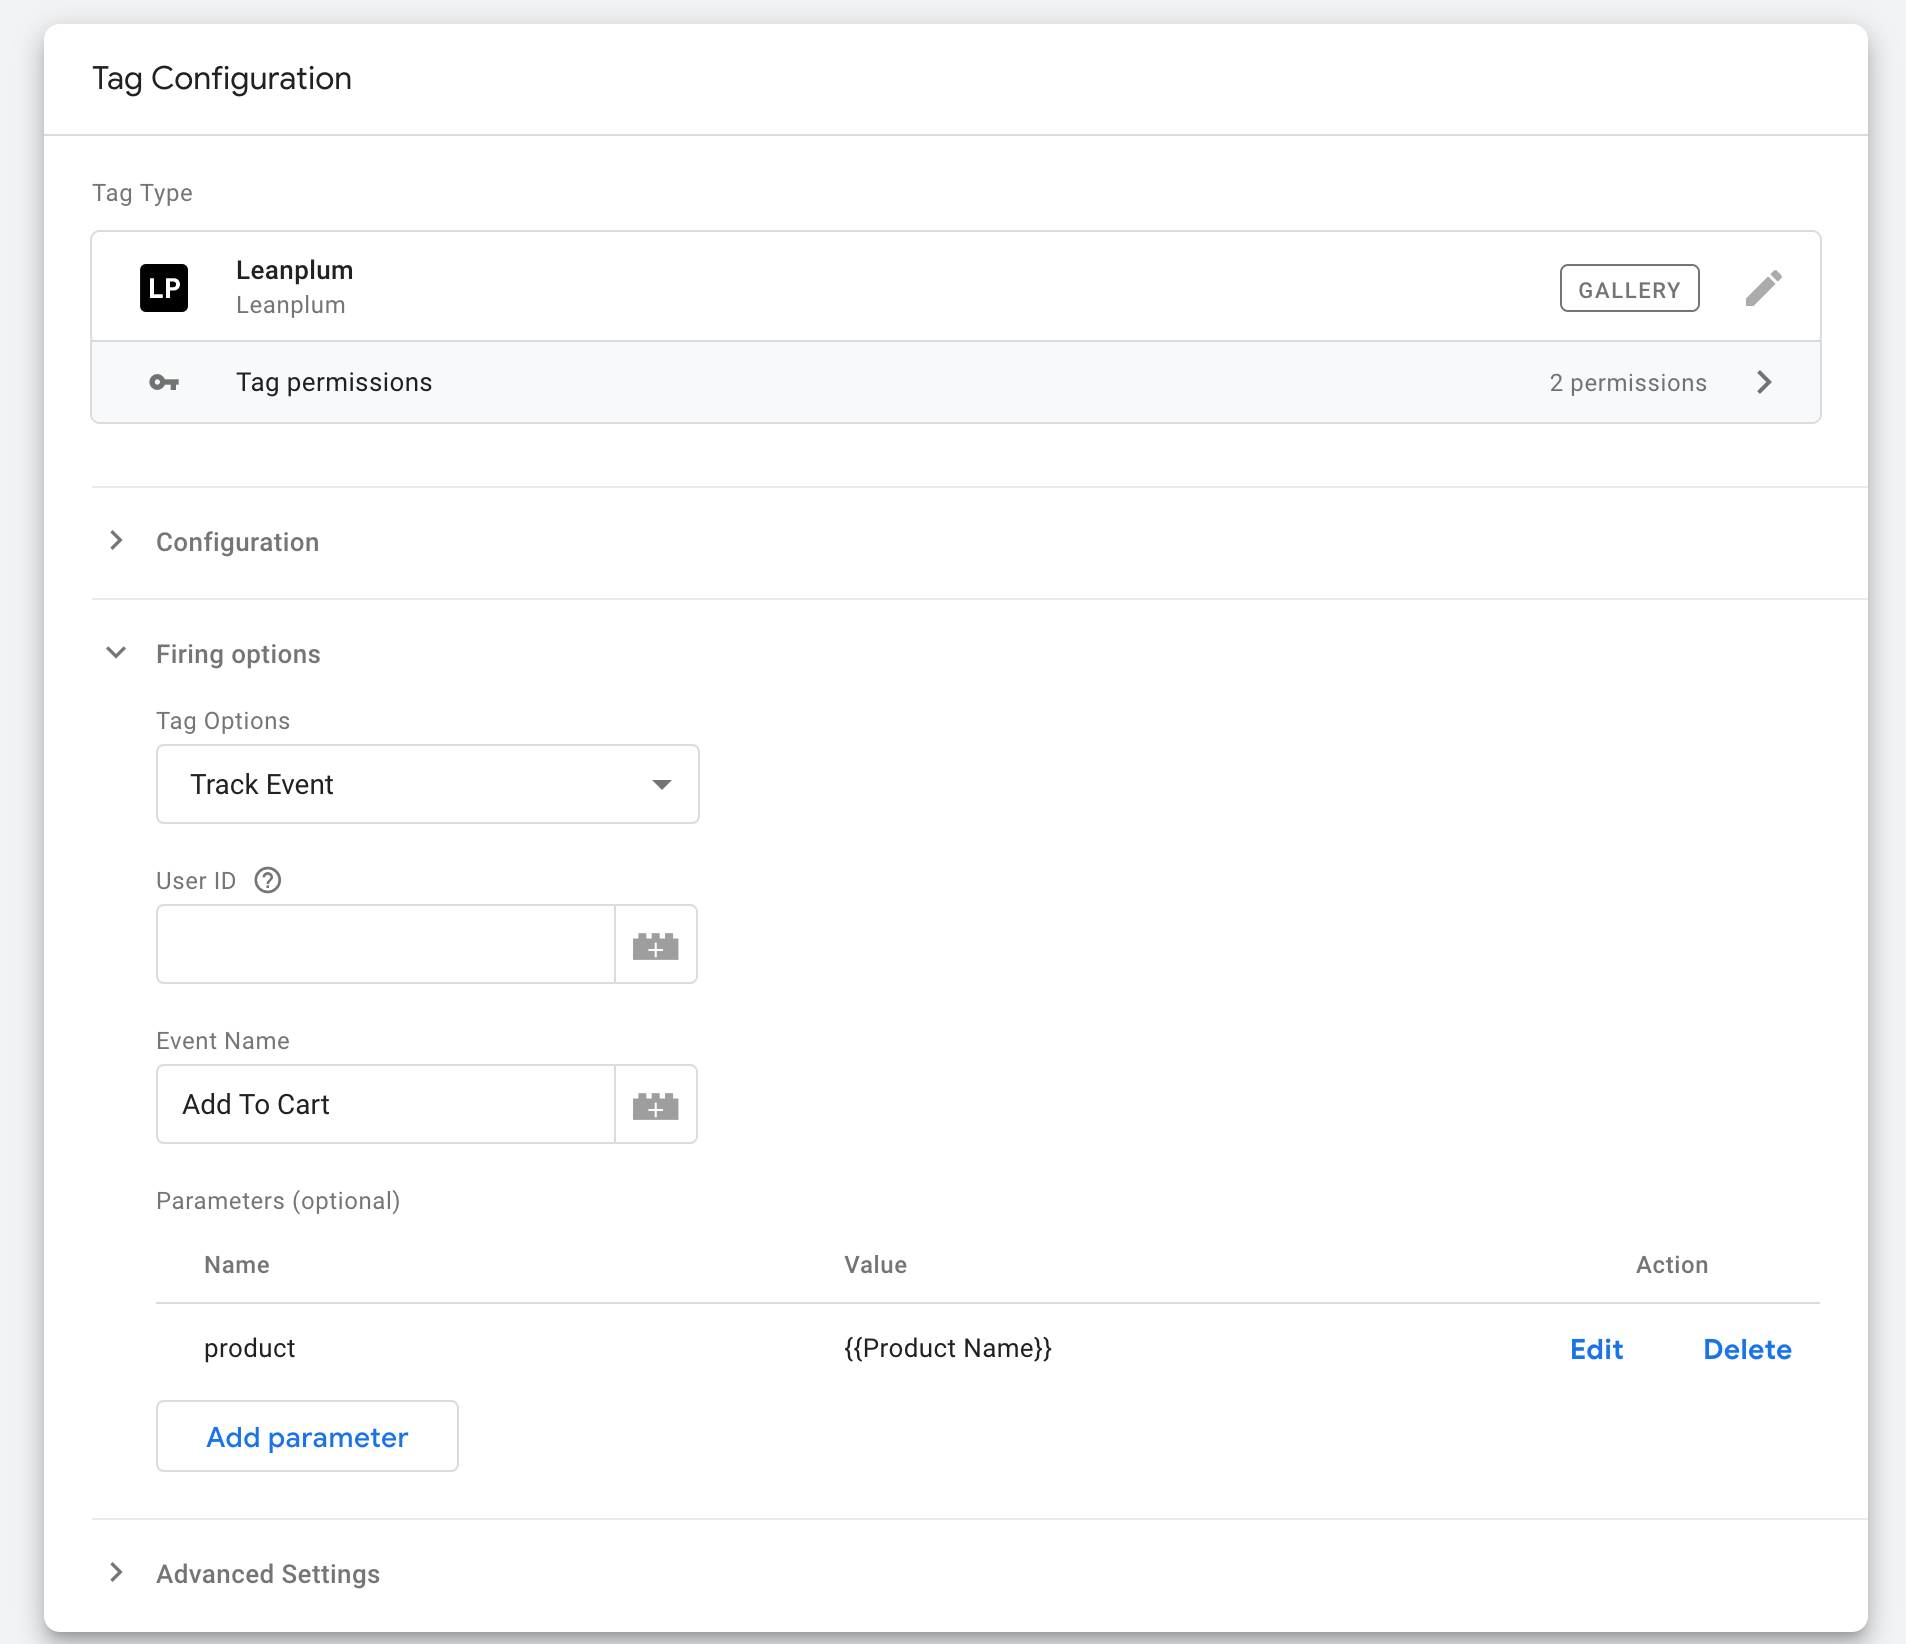 A screenshot of the Google Tag Manager configuration for tracking an "Add to cart" event.